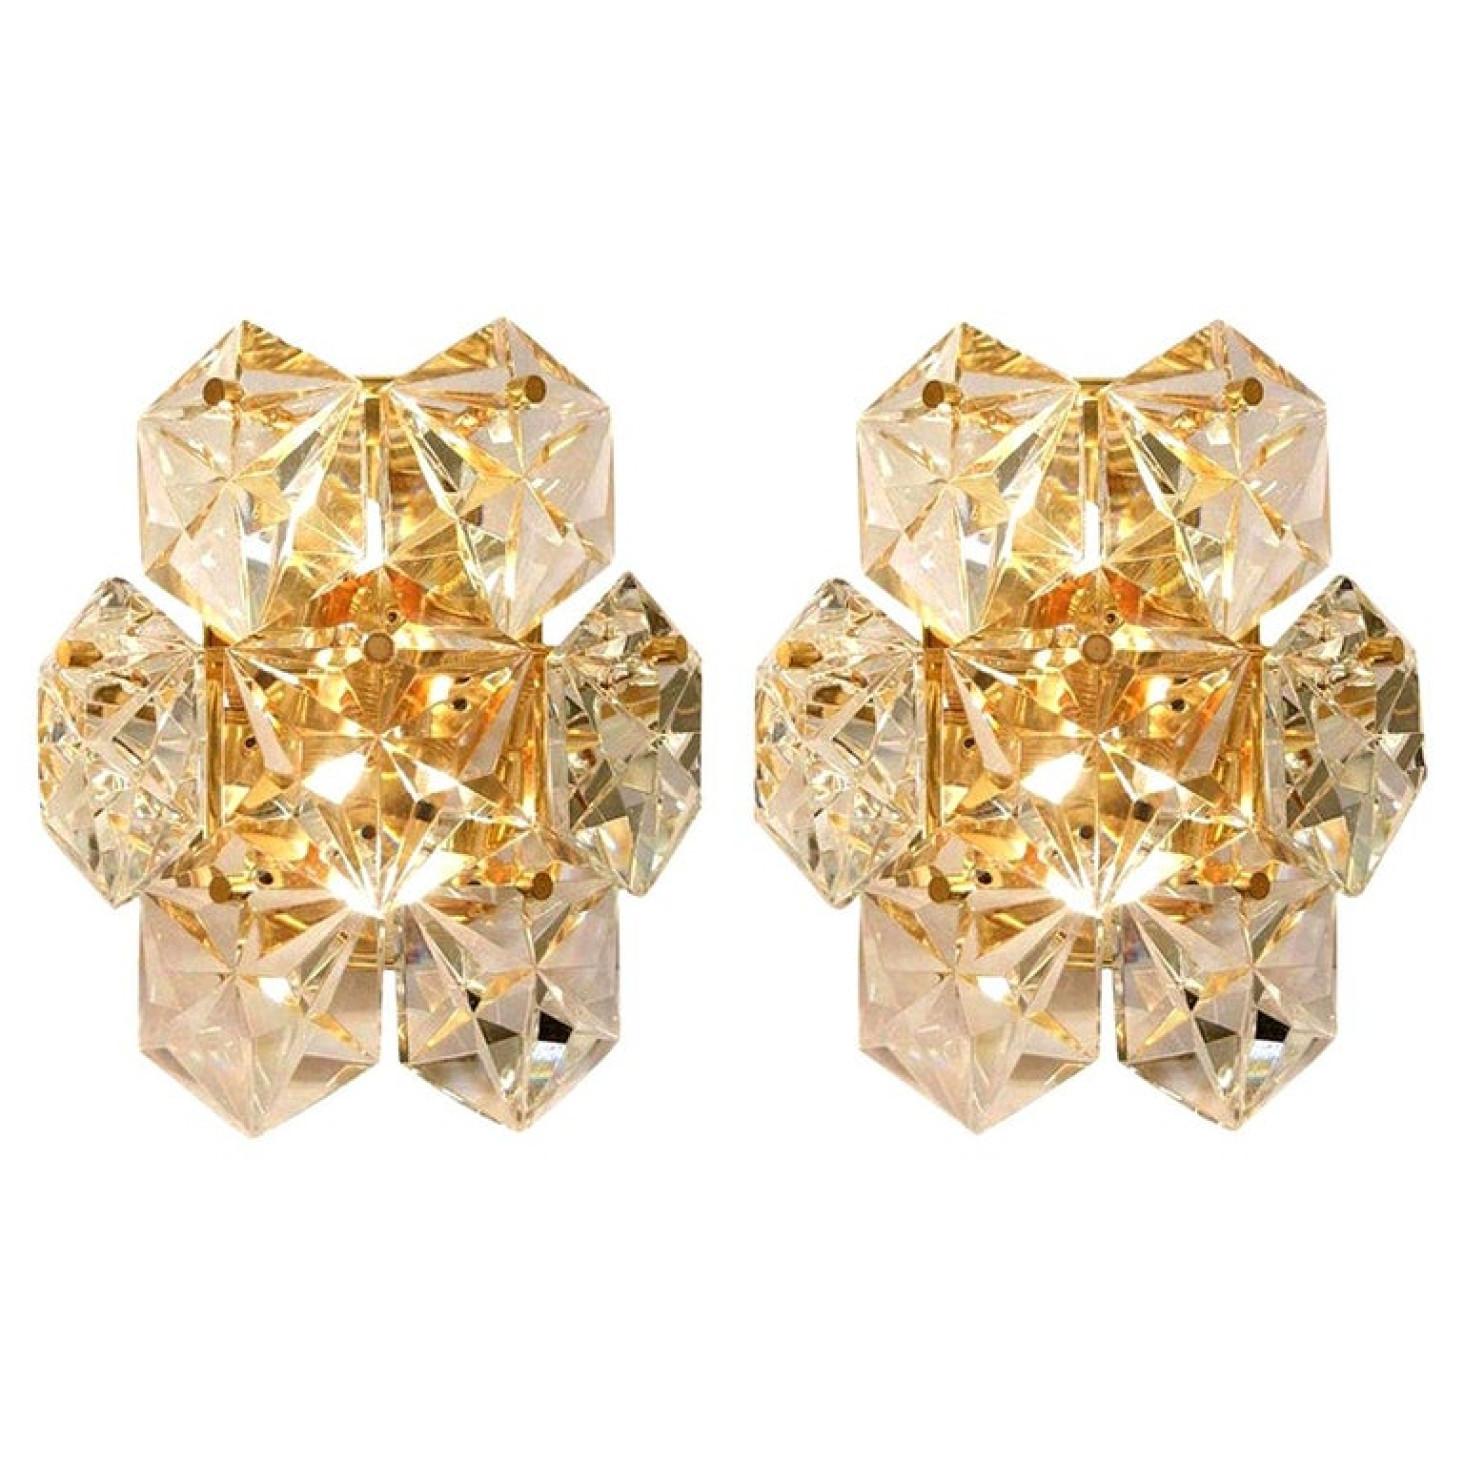 Mid-Century Modern Pair Faceted Crystal and Gilt Sconces by Kinkeldey, Germany For Sale